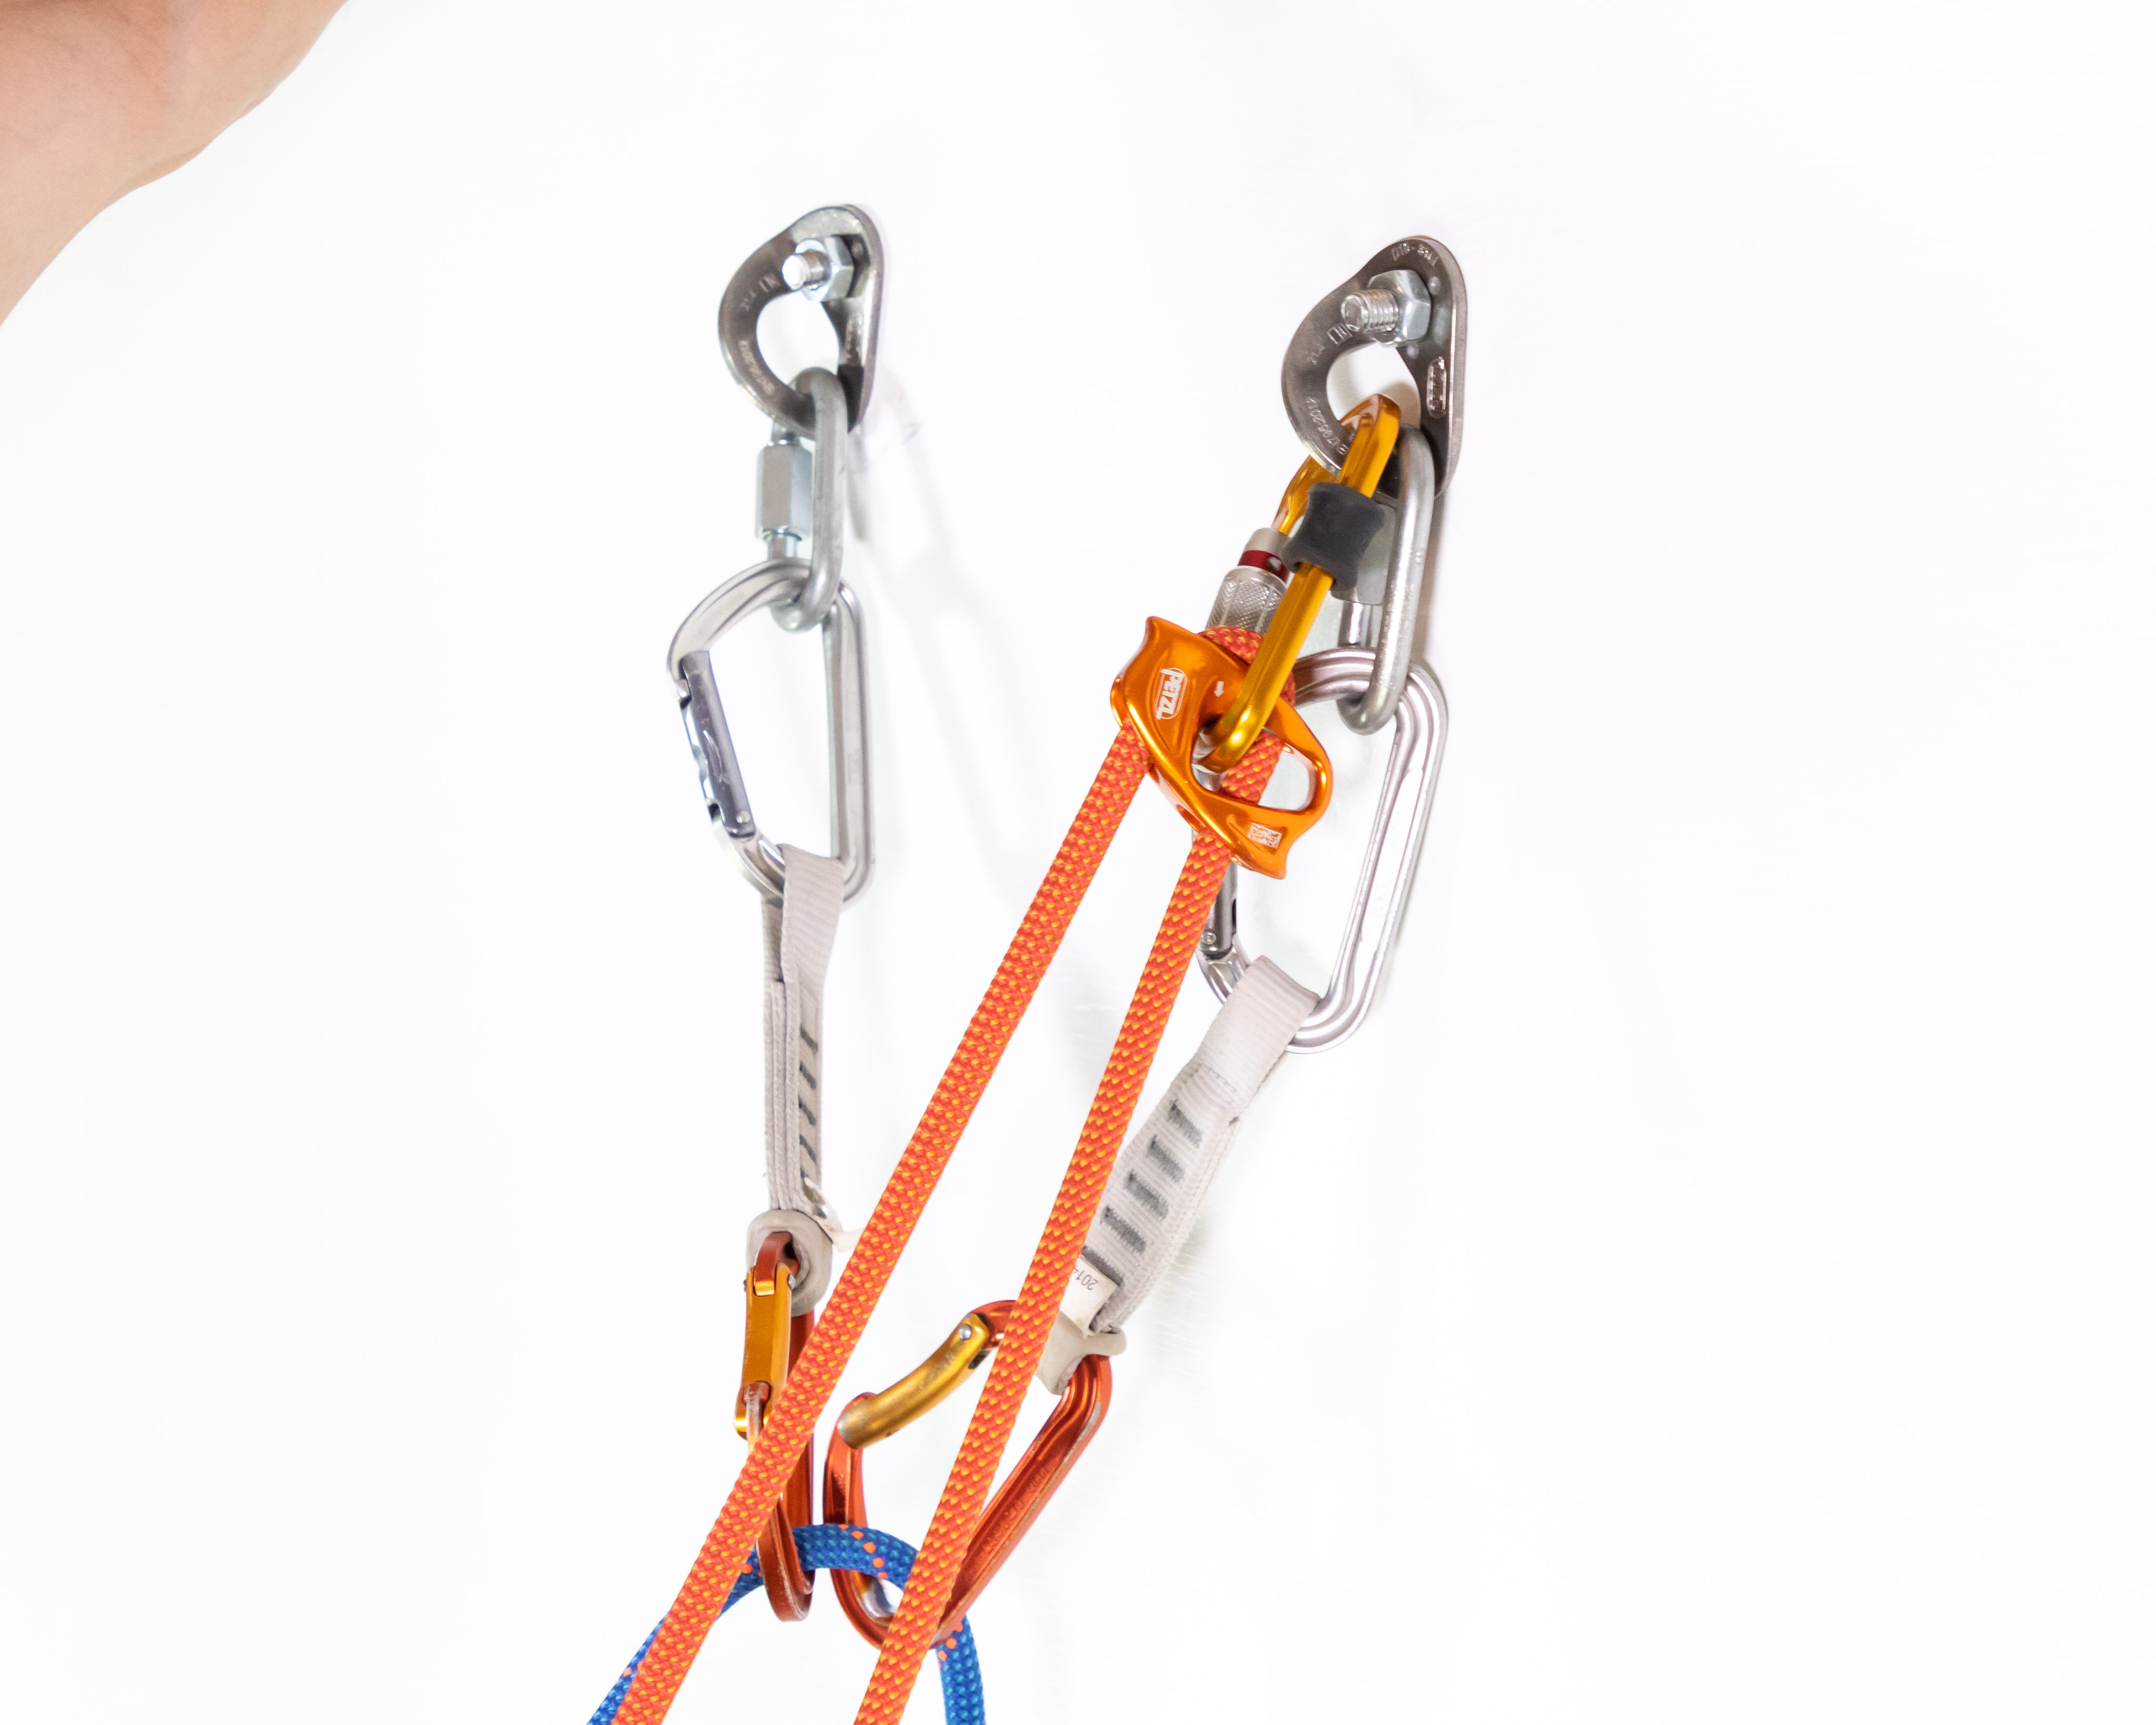 clipping lanyard to anchors